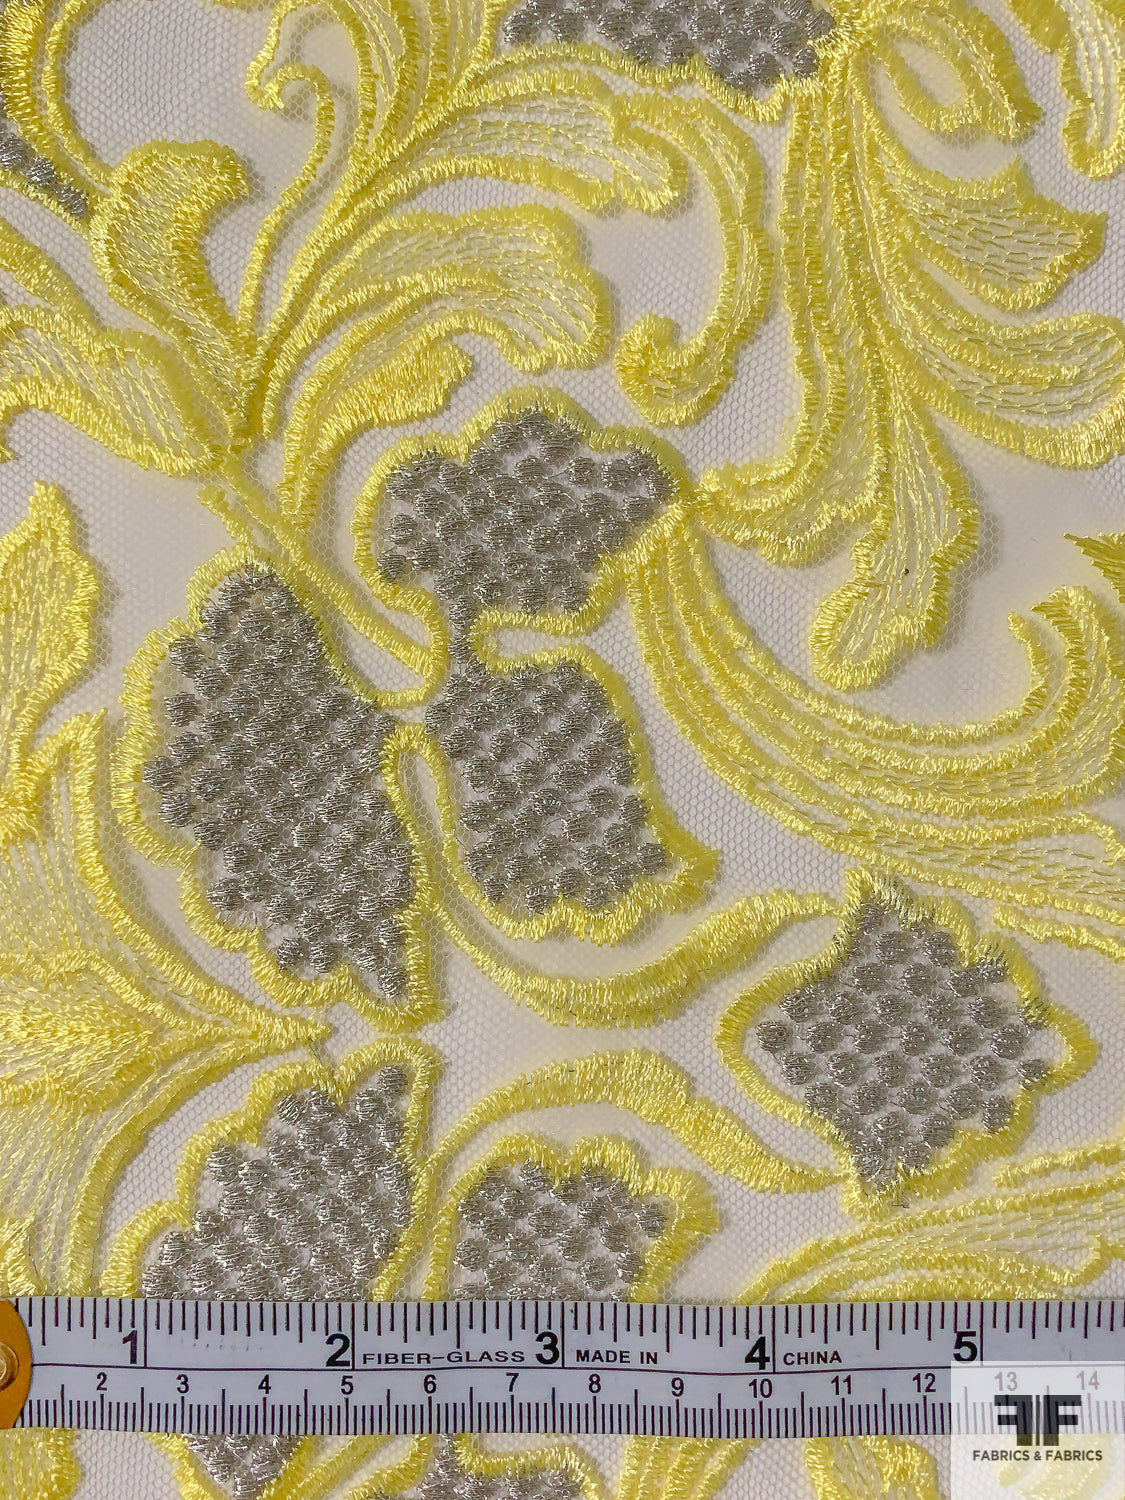 Double Scalloped Floral Embroidered Tulle with Metallic Detailing - Soft Yellow / Silver